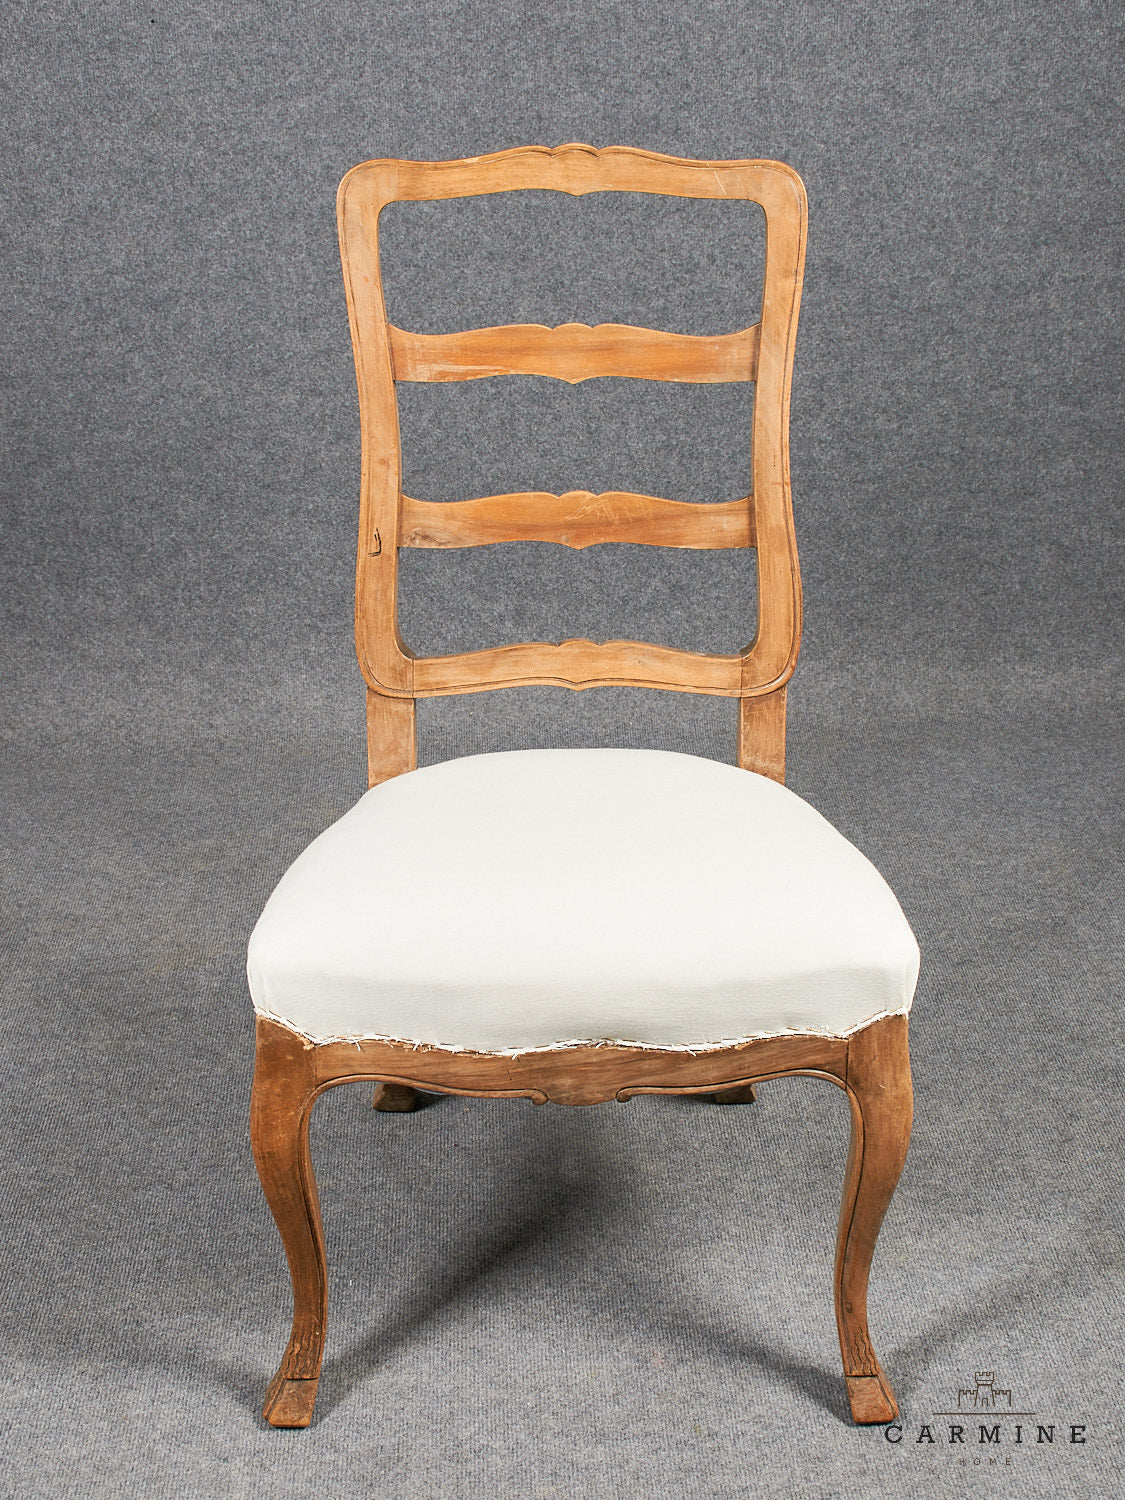 6 Bernese chairs, mid-18th century